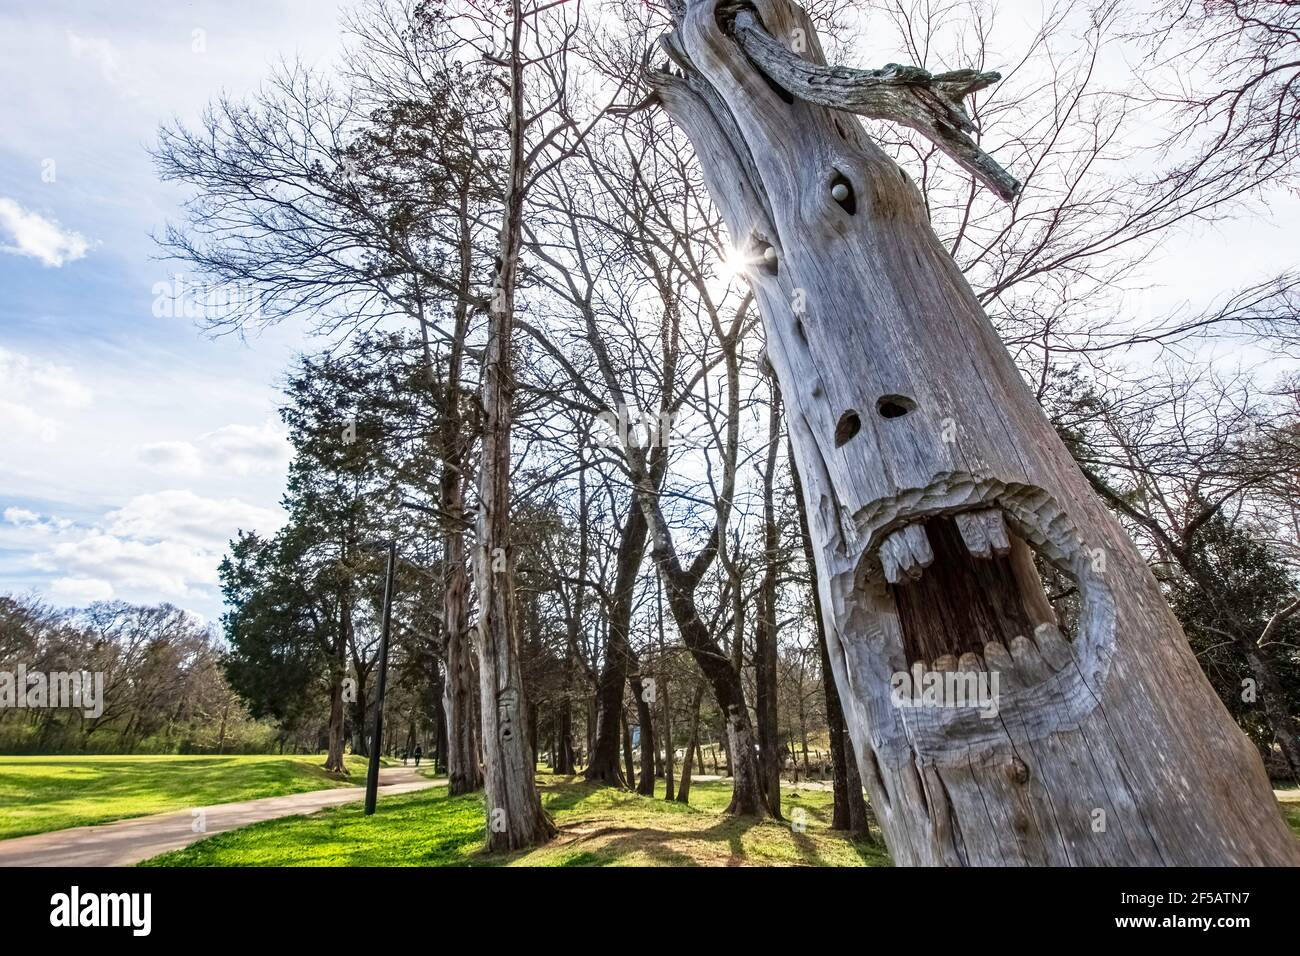 Montevallo, Alabama/USA-March 12: One of the famous woodcarved faces in Orr Park by artist Tim Tingle with another carving visible in the background.. Stock Photo